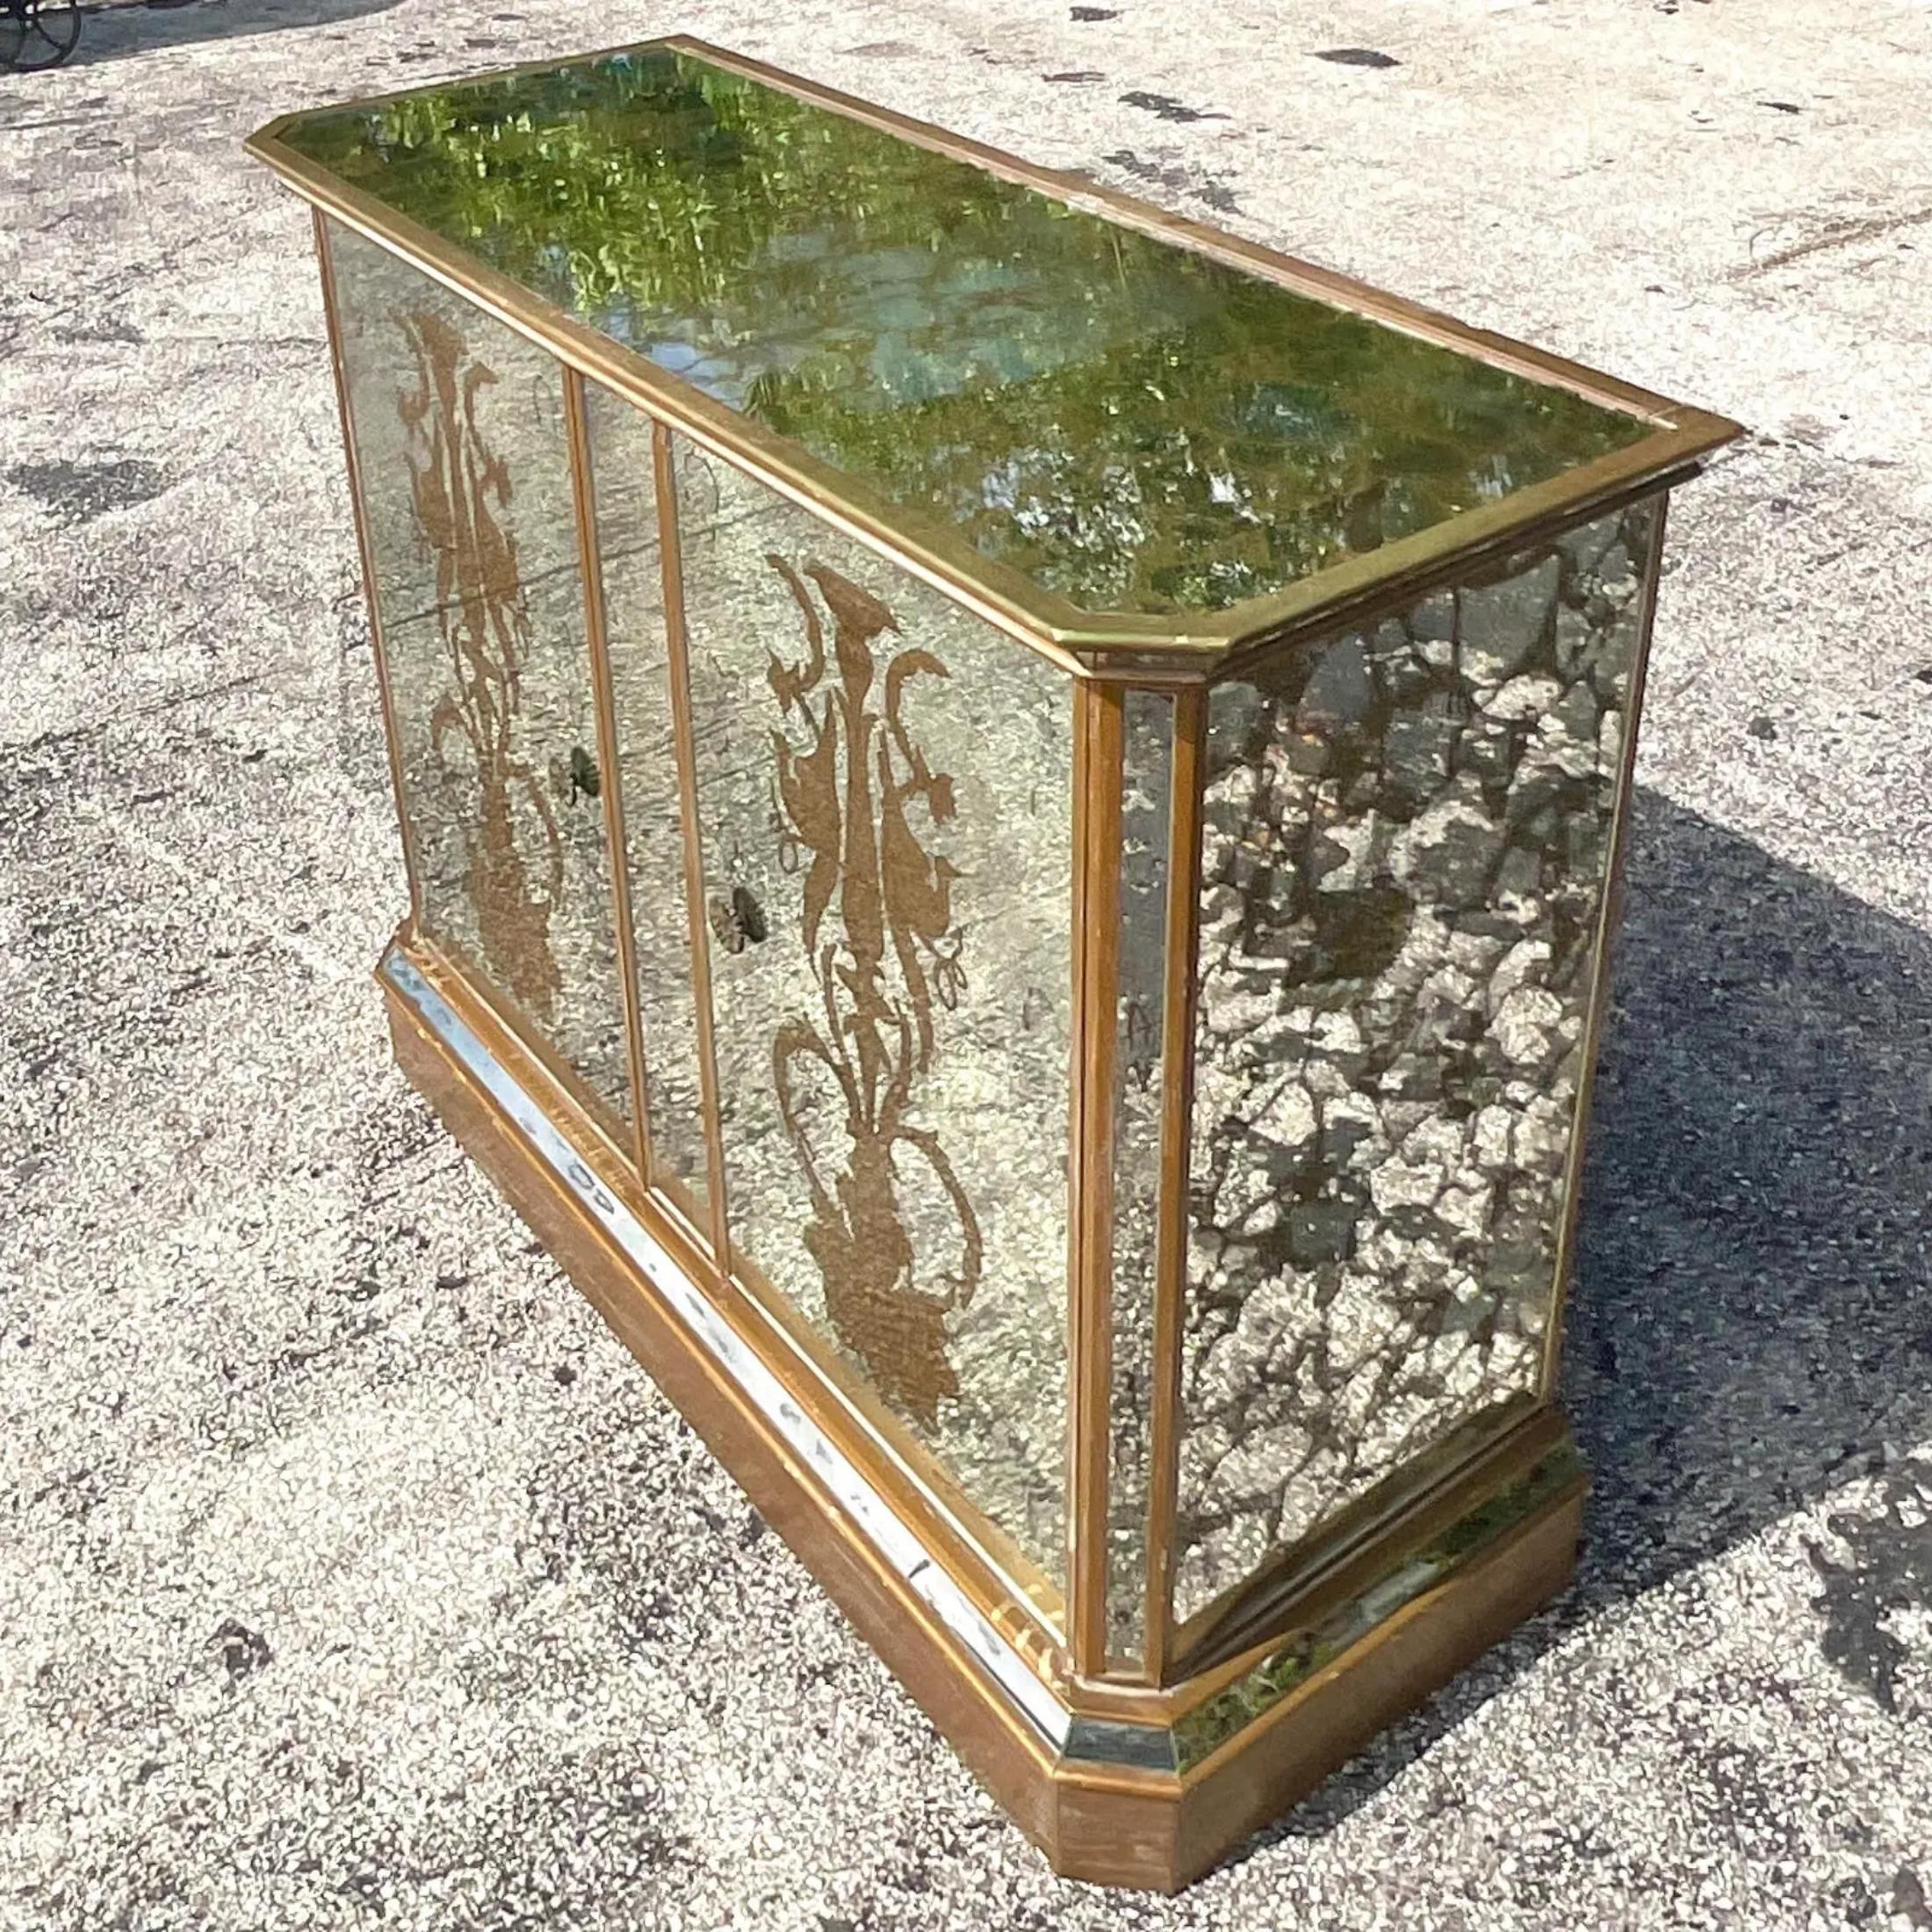 A fabulous vintage Regency dry bar. A chic Eglomise cabinet with a flip top and two interior spaces for liquor. The height of glamour. Acquired from a Palm Beach estate